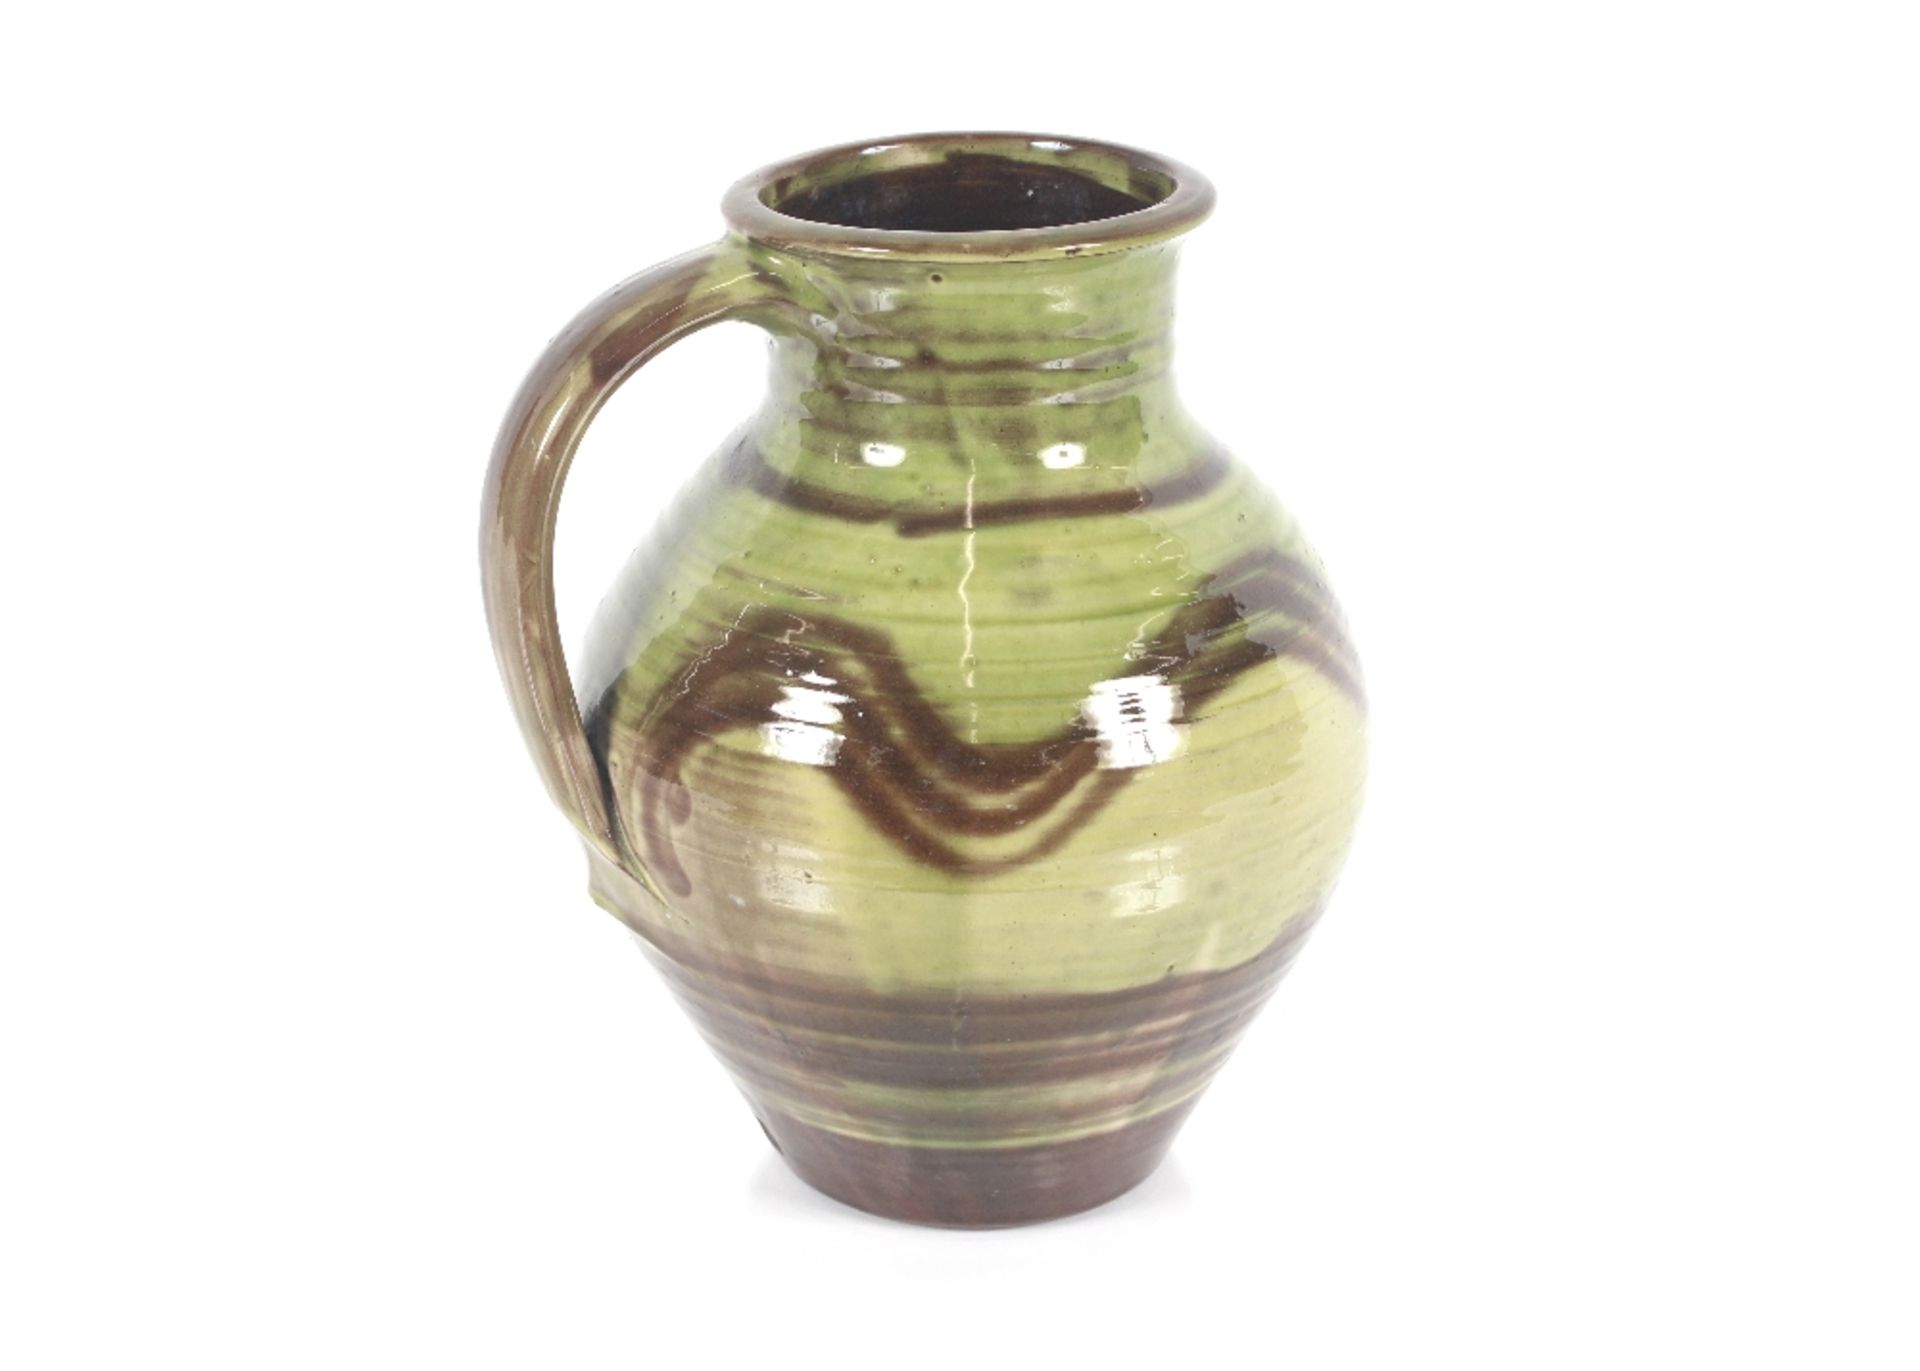 A David Leach pottery baluster jug, with brown and